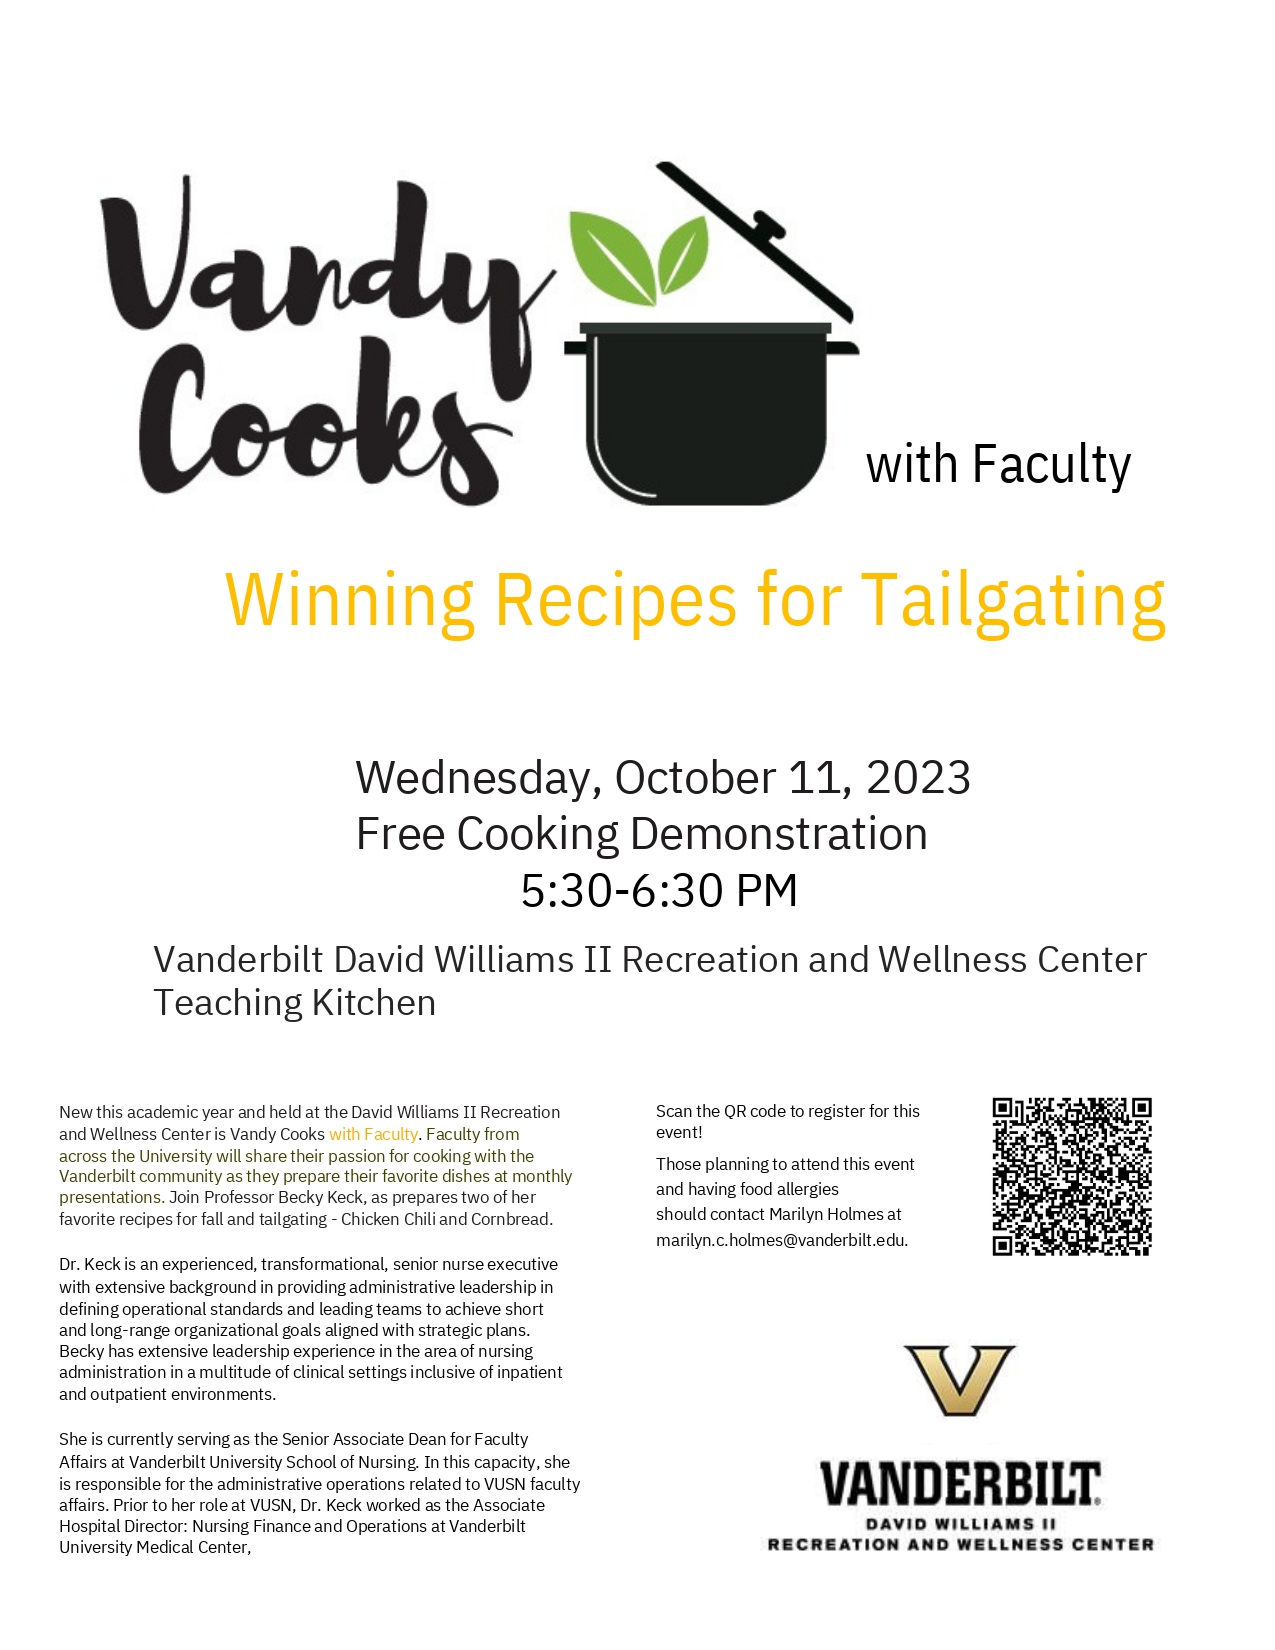 Vandy Cooks with Faculty: 'Winning Recipes for Tailgating' Oct. 11